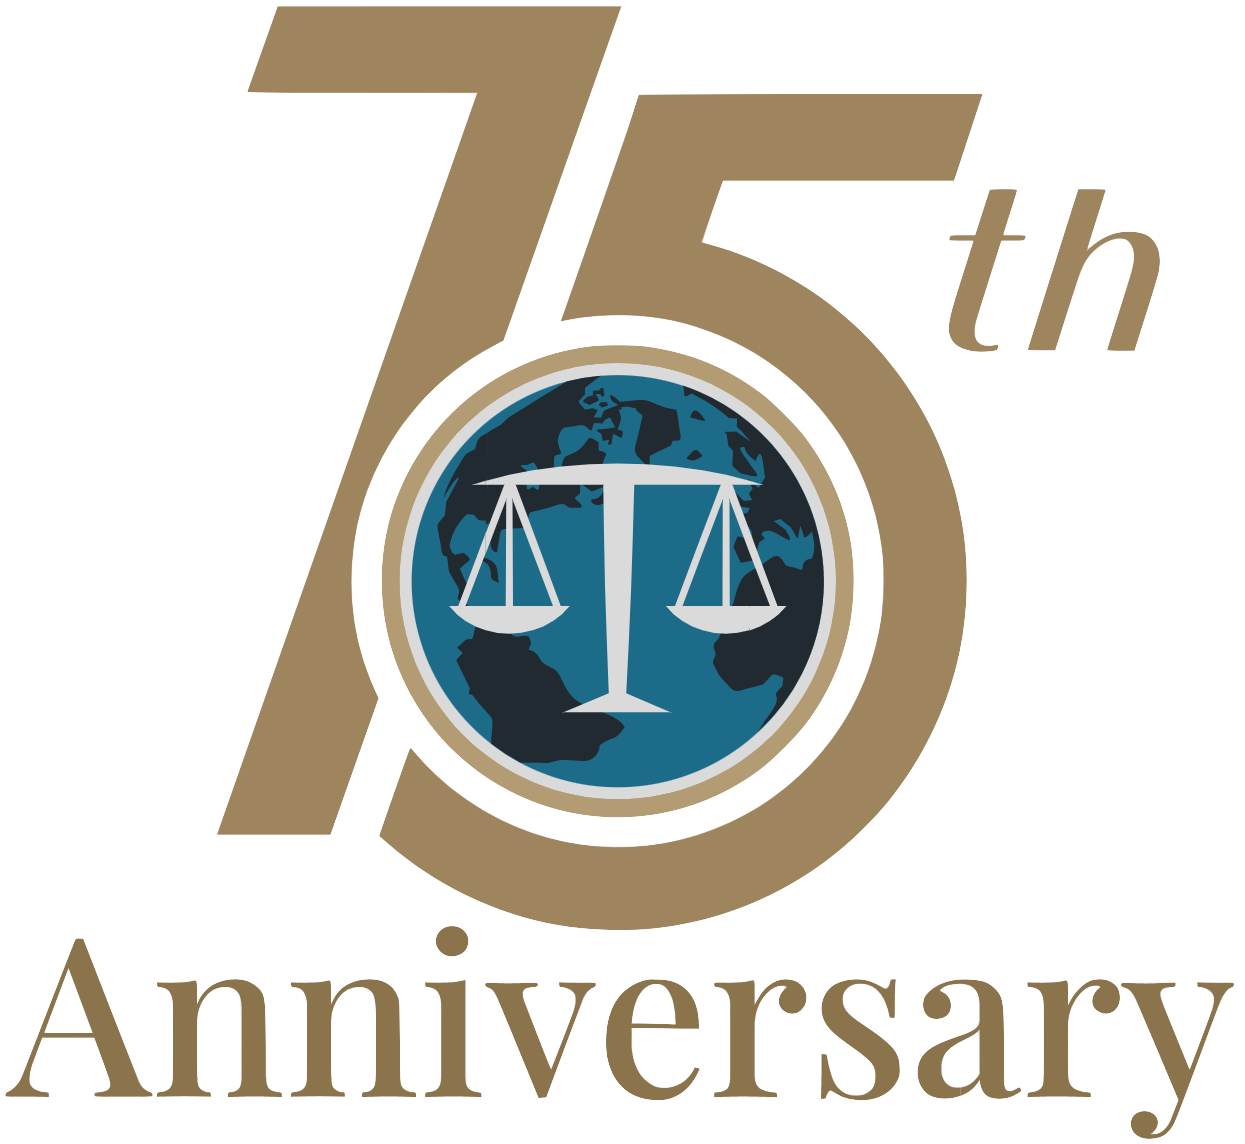 The Center for American and International Law 75th Anniversary Logo